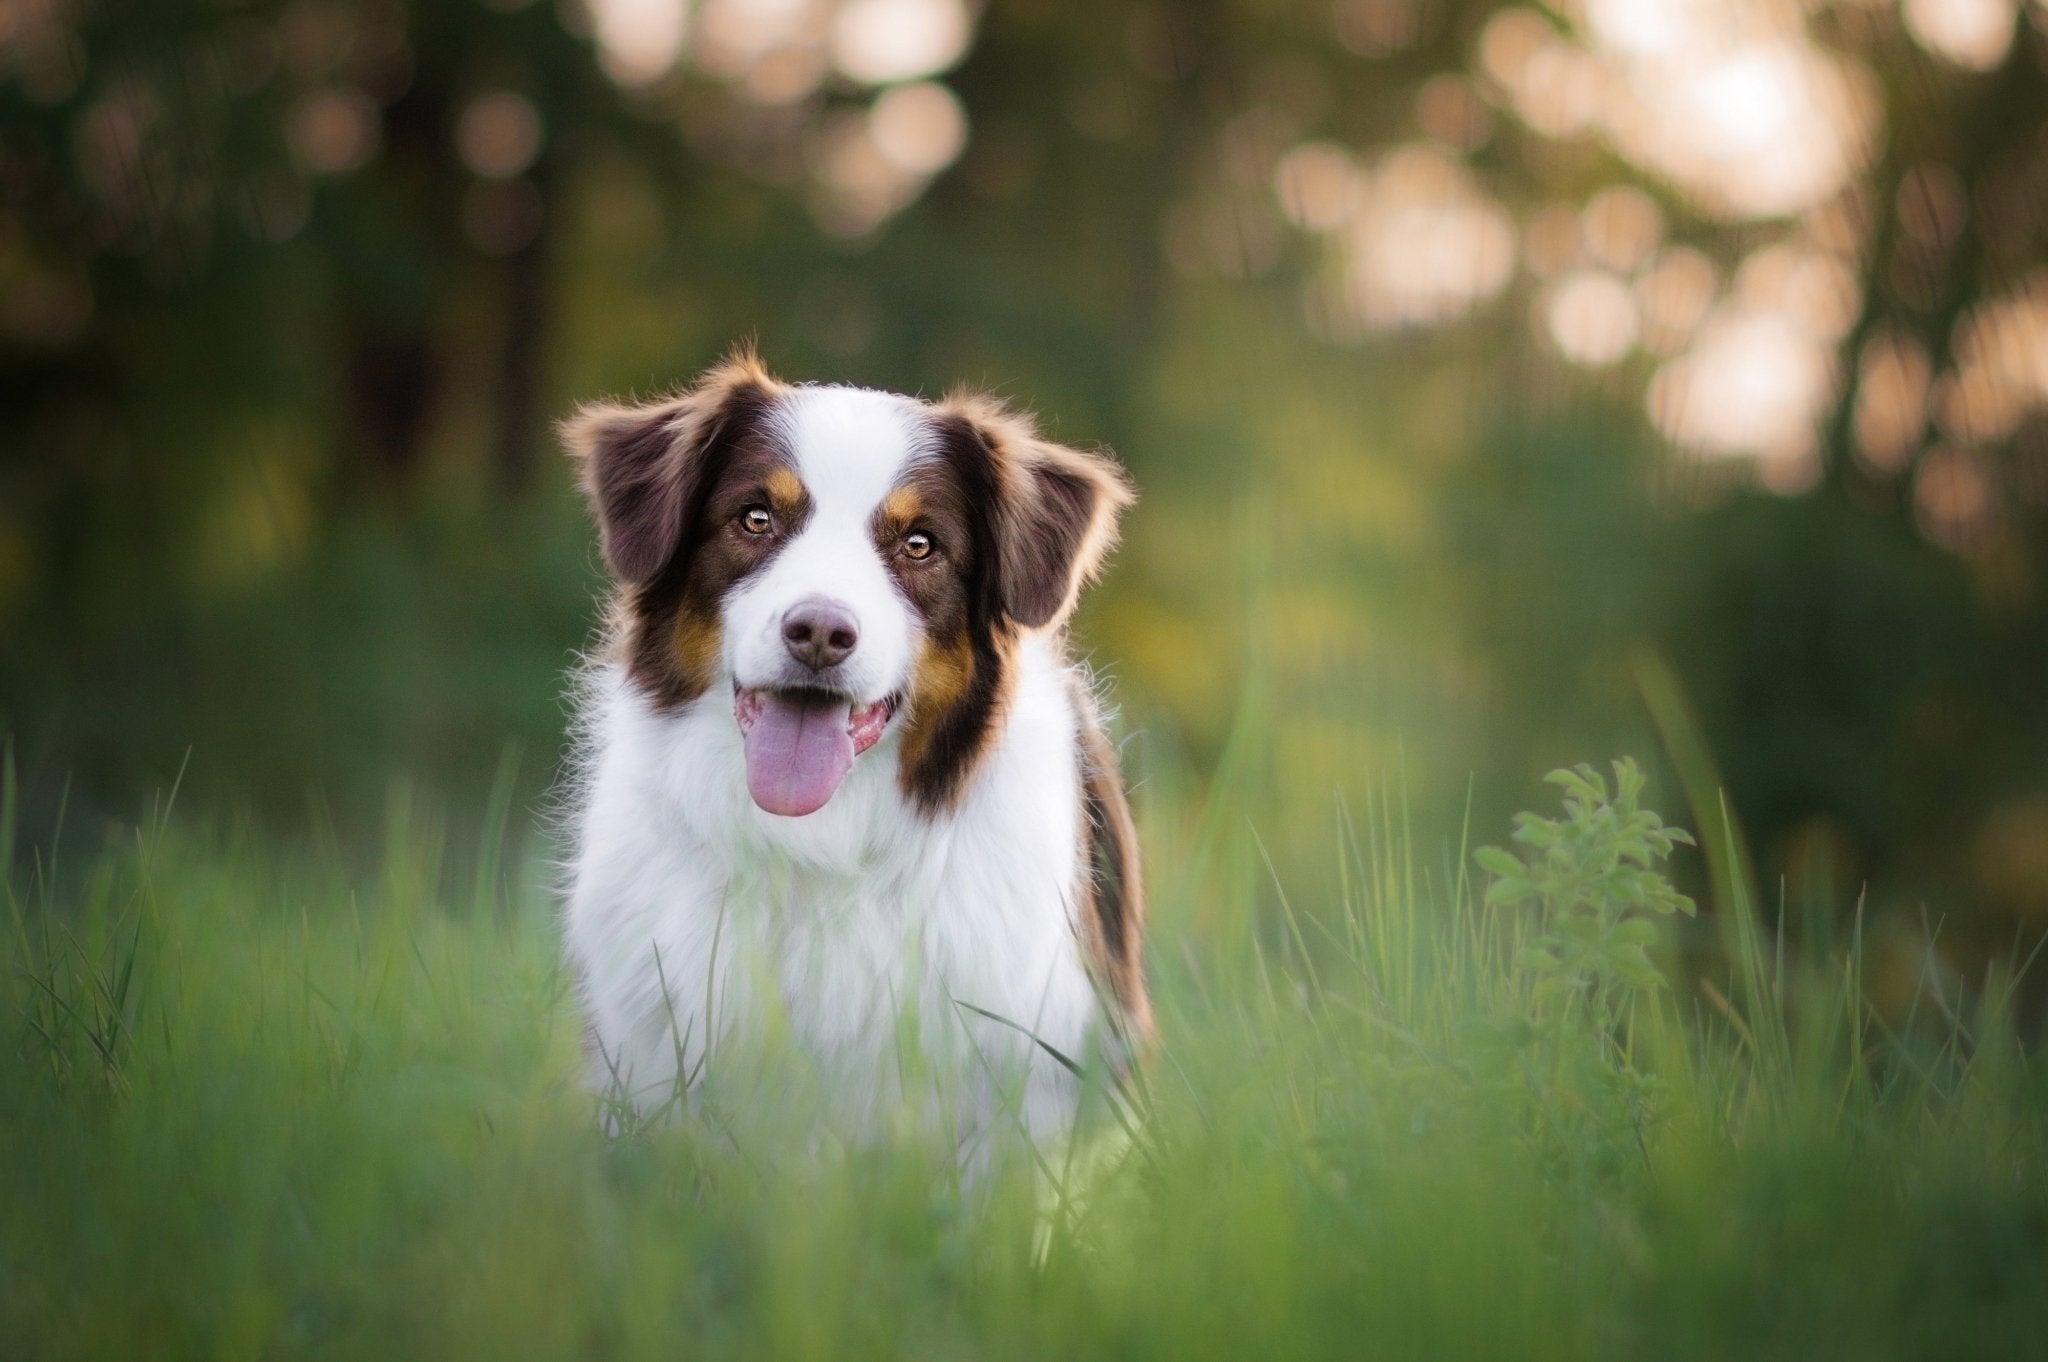 Can Nutritional Supplements Boost Your Dog's Immune System?